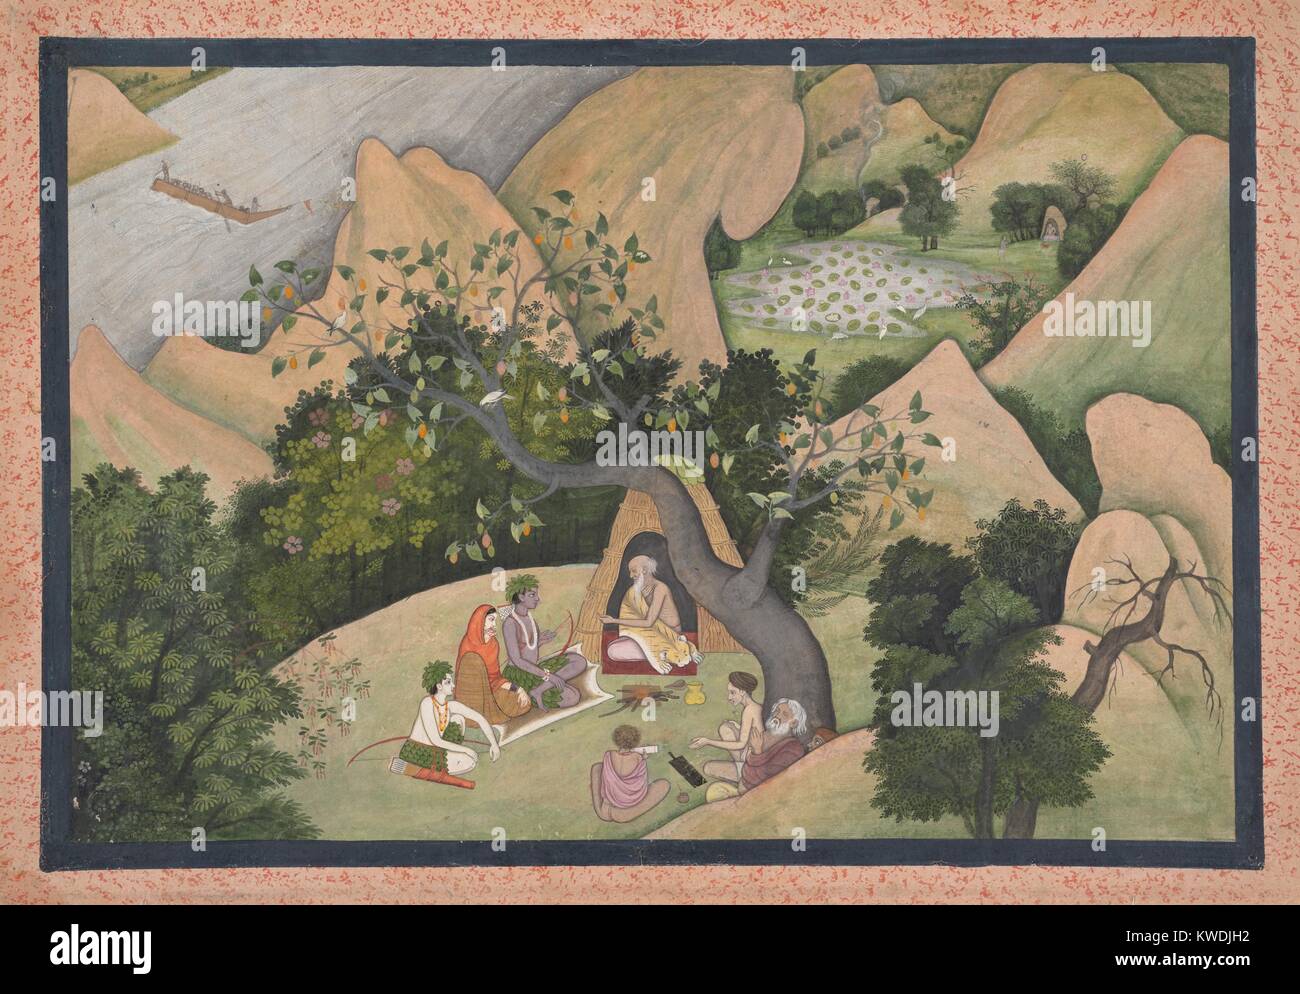 RAMA, SITA, AND LAKSHMANA AT THE HERMITAGE OF BHARADVAJA, Hindu, painting, opaque watercolor. The sage Bharadvaja, a revered Vedic Arya sage is seated in his wilderness forest shelter, and advises Rama, Sita, and Lakshmana (BSLOC 2017 16 22) Stock Photo